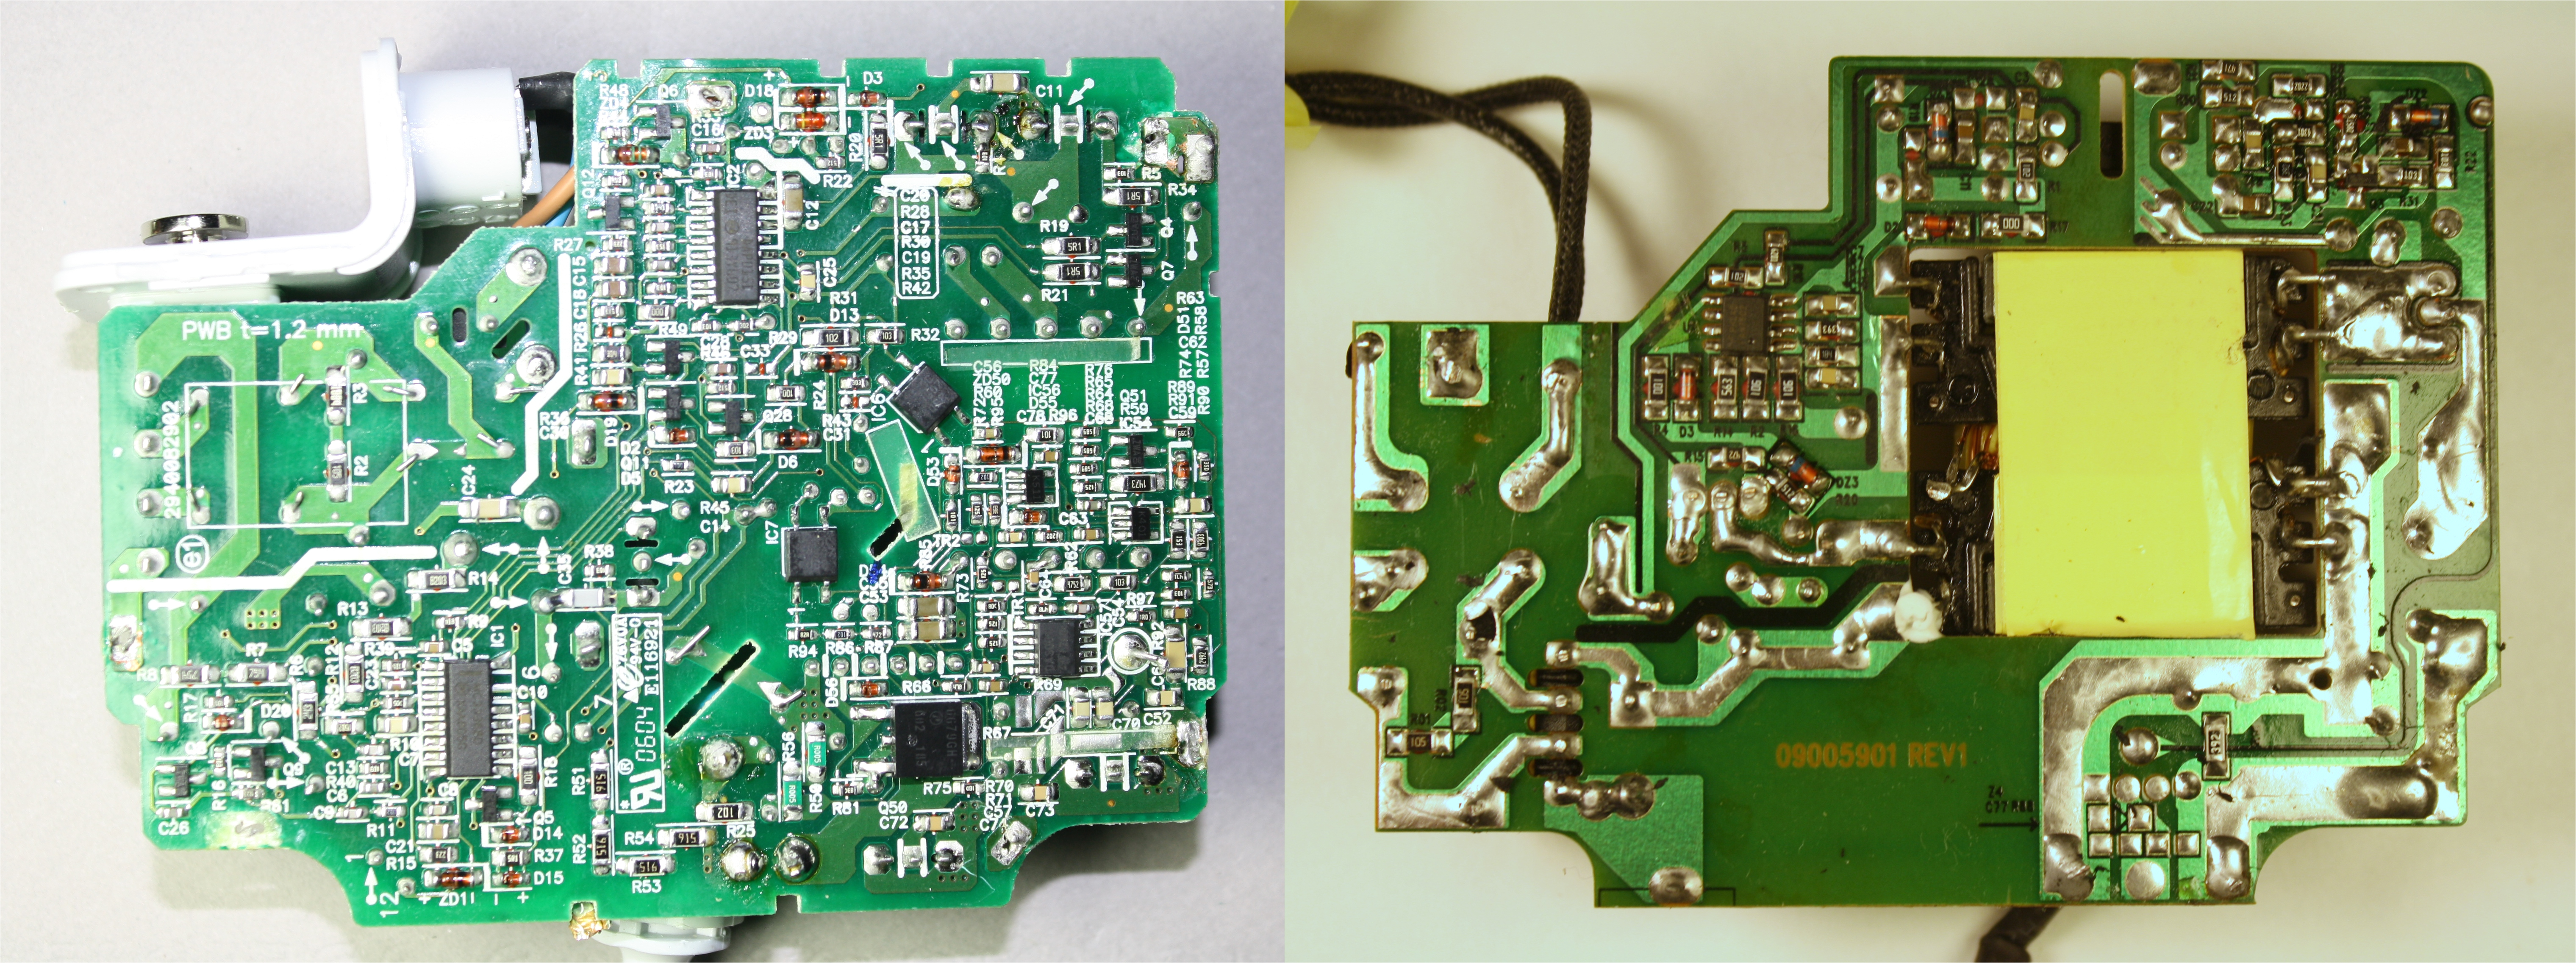 the circuit board of the apple 85w macbook charger left compared with an imitation